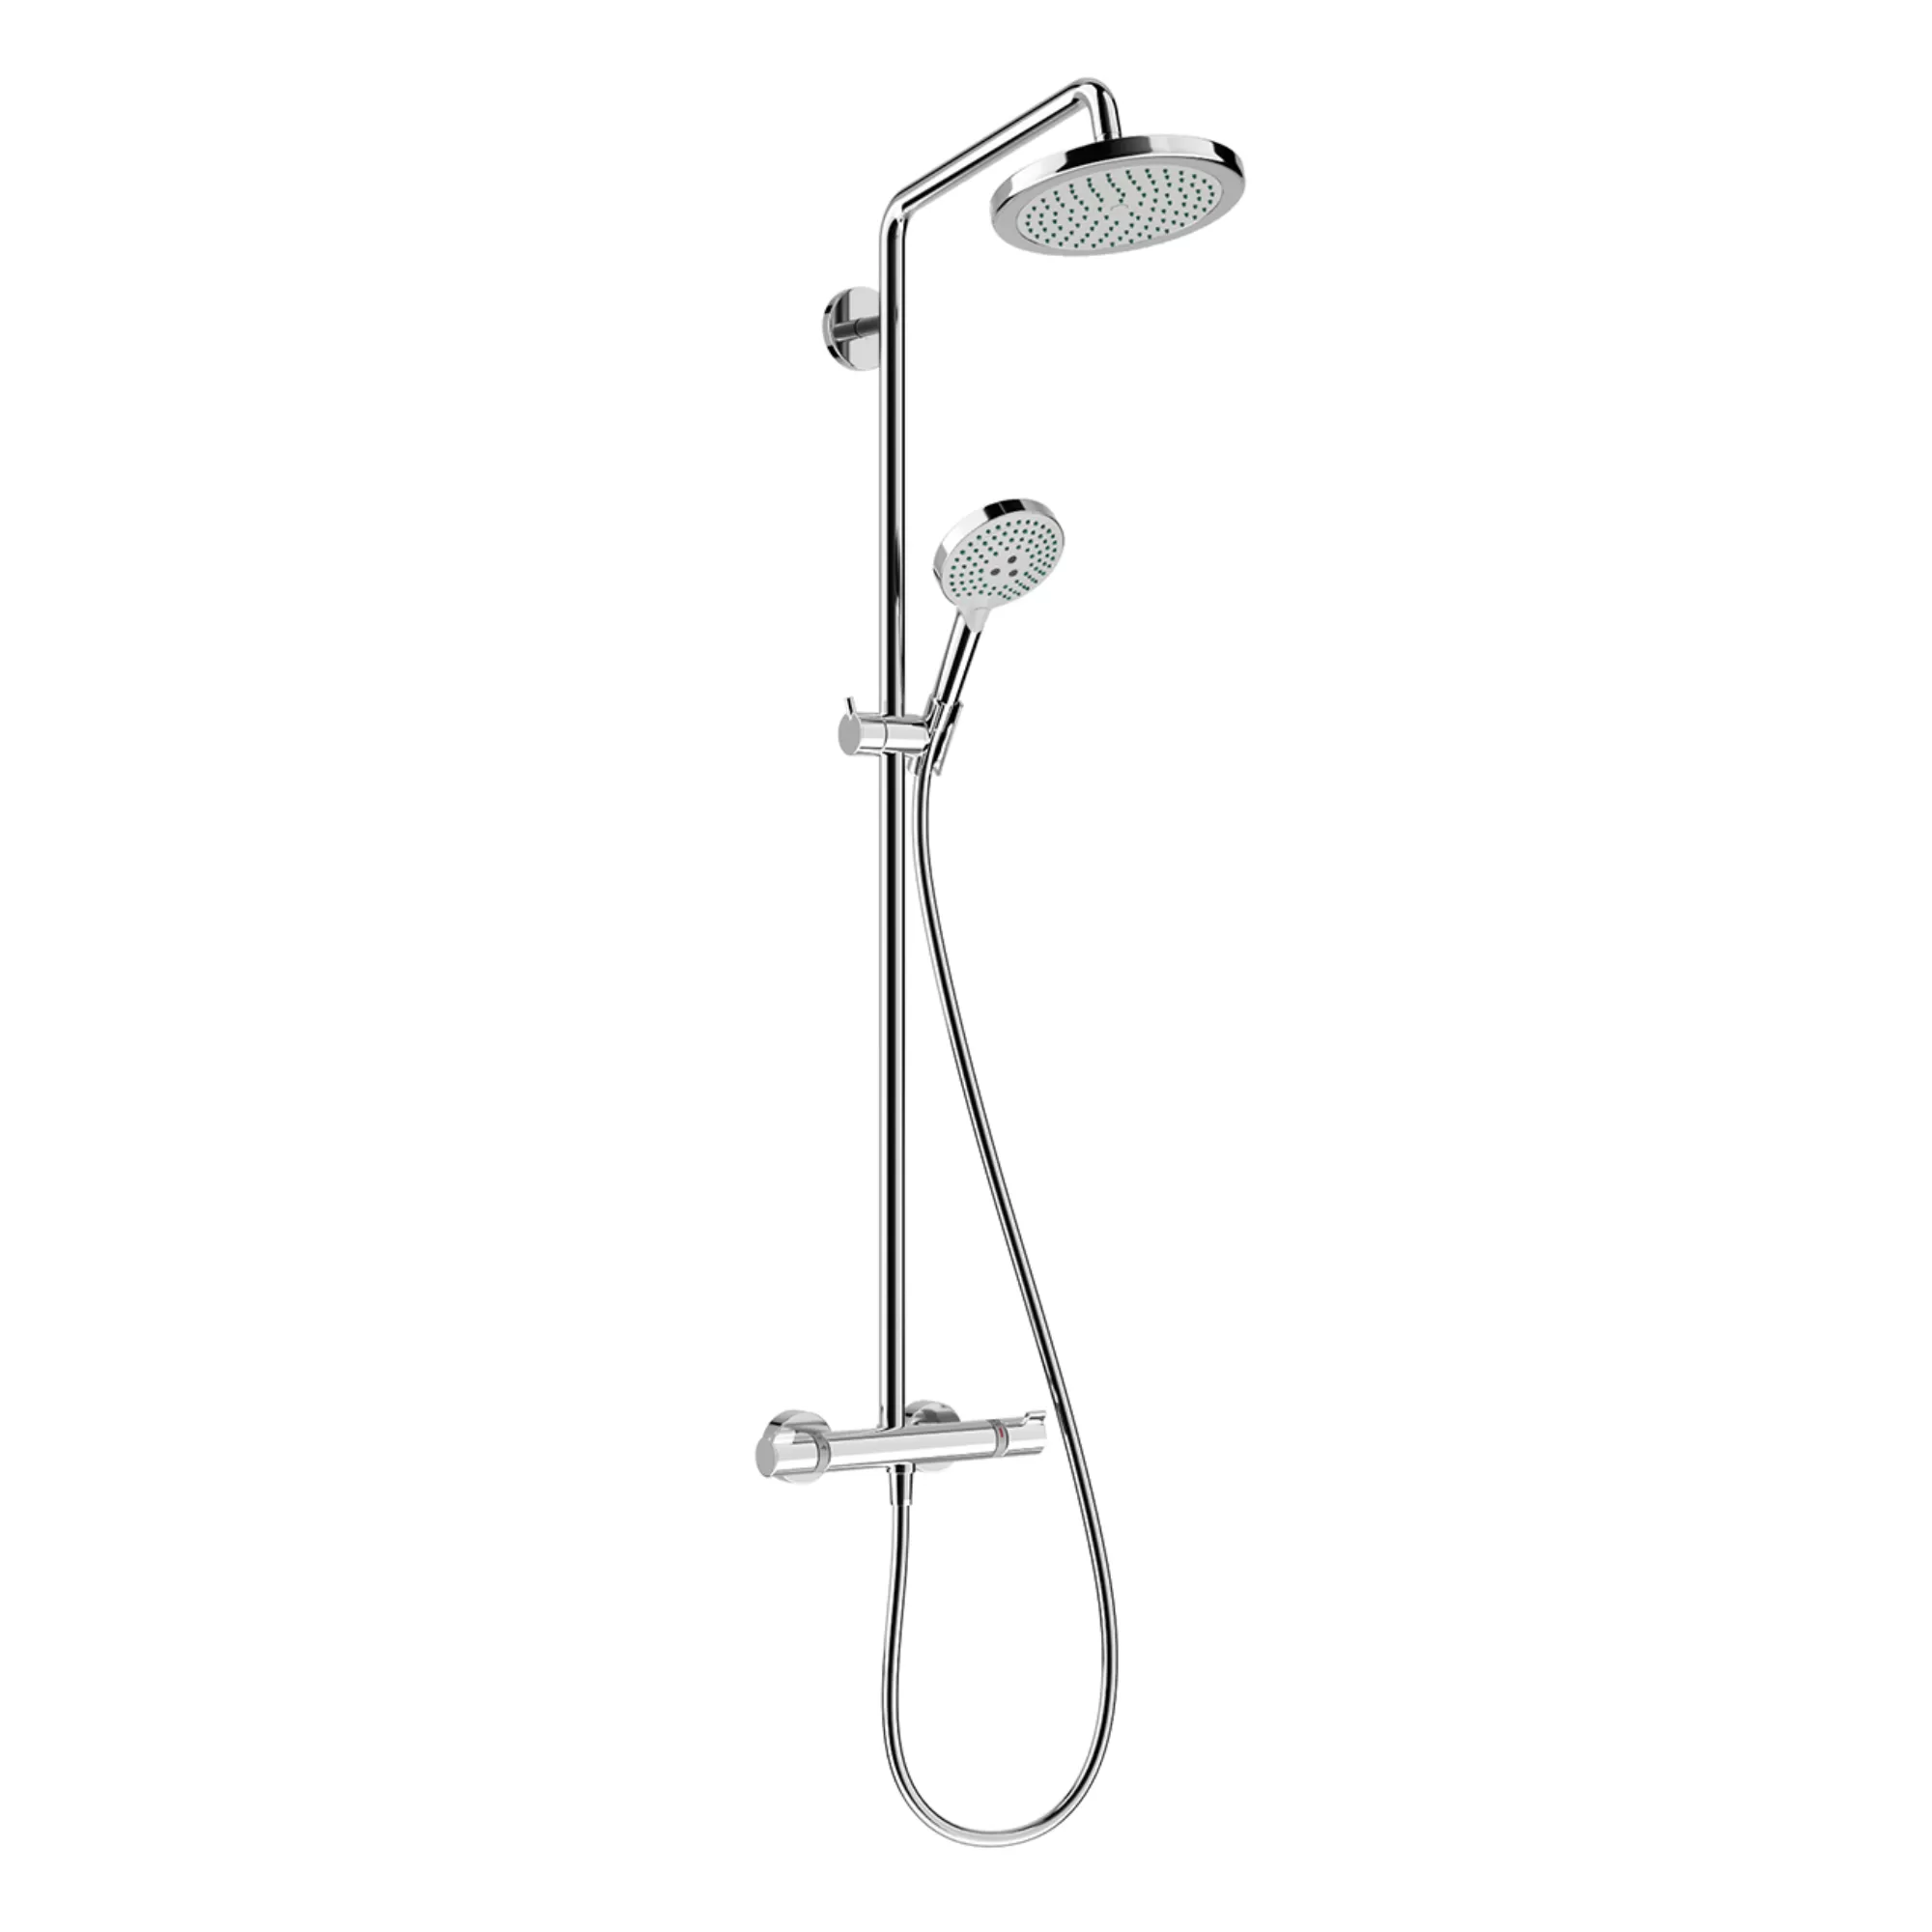 Bathroom – croma-showerpipe-220-thermostat-by-hansgrohe